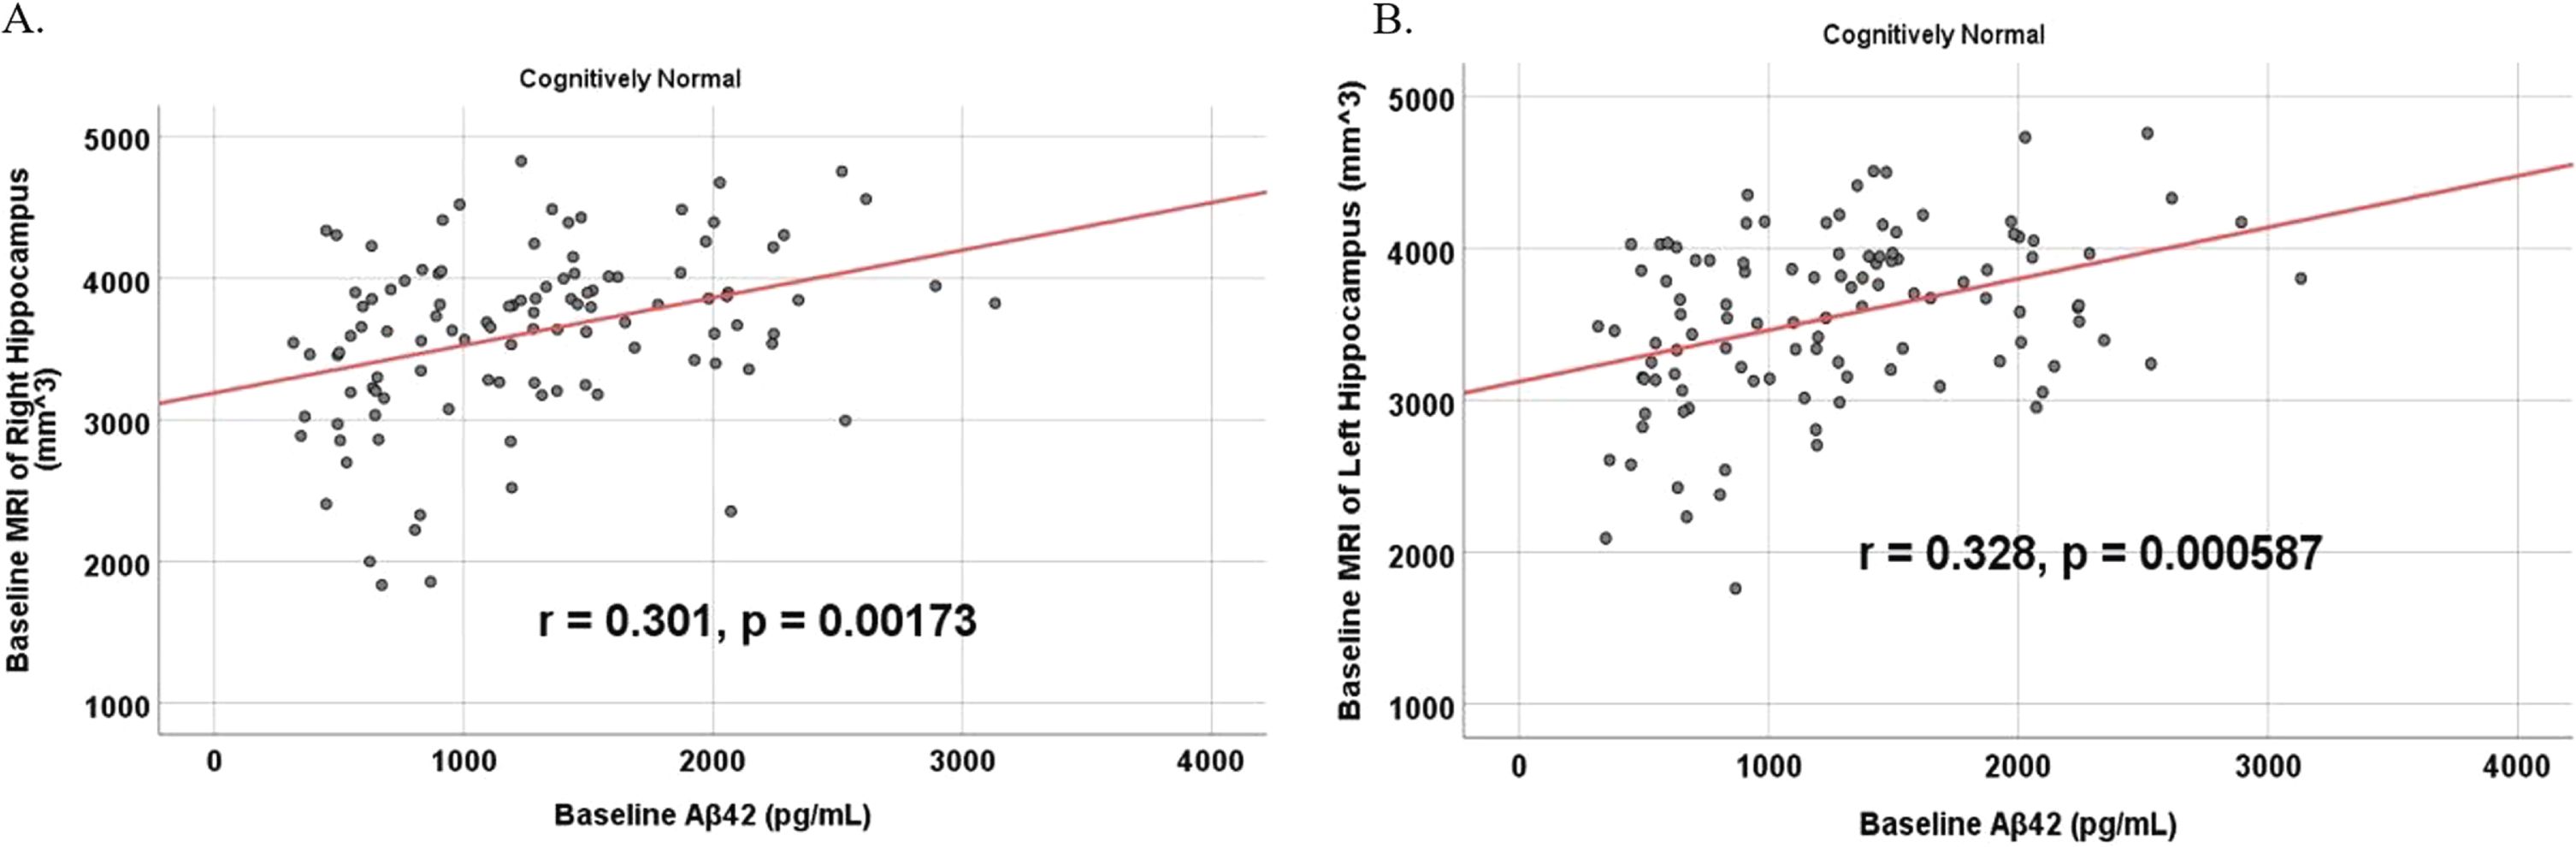 Partial correlations between baseline Aβ42 and baseline MRI brain volume regions in cognitively unimpaired control participants, corrected for age and education. Scatterplots above are corrected for age and education. A) Aβ42 versus Right Hippocampus (r = 0.301, p = 0.00173). B) Aβ42 versus Left Hippocampus (r = 0.328, p = 0.000587).